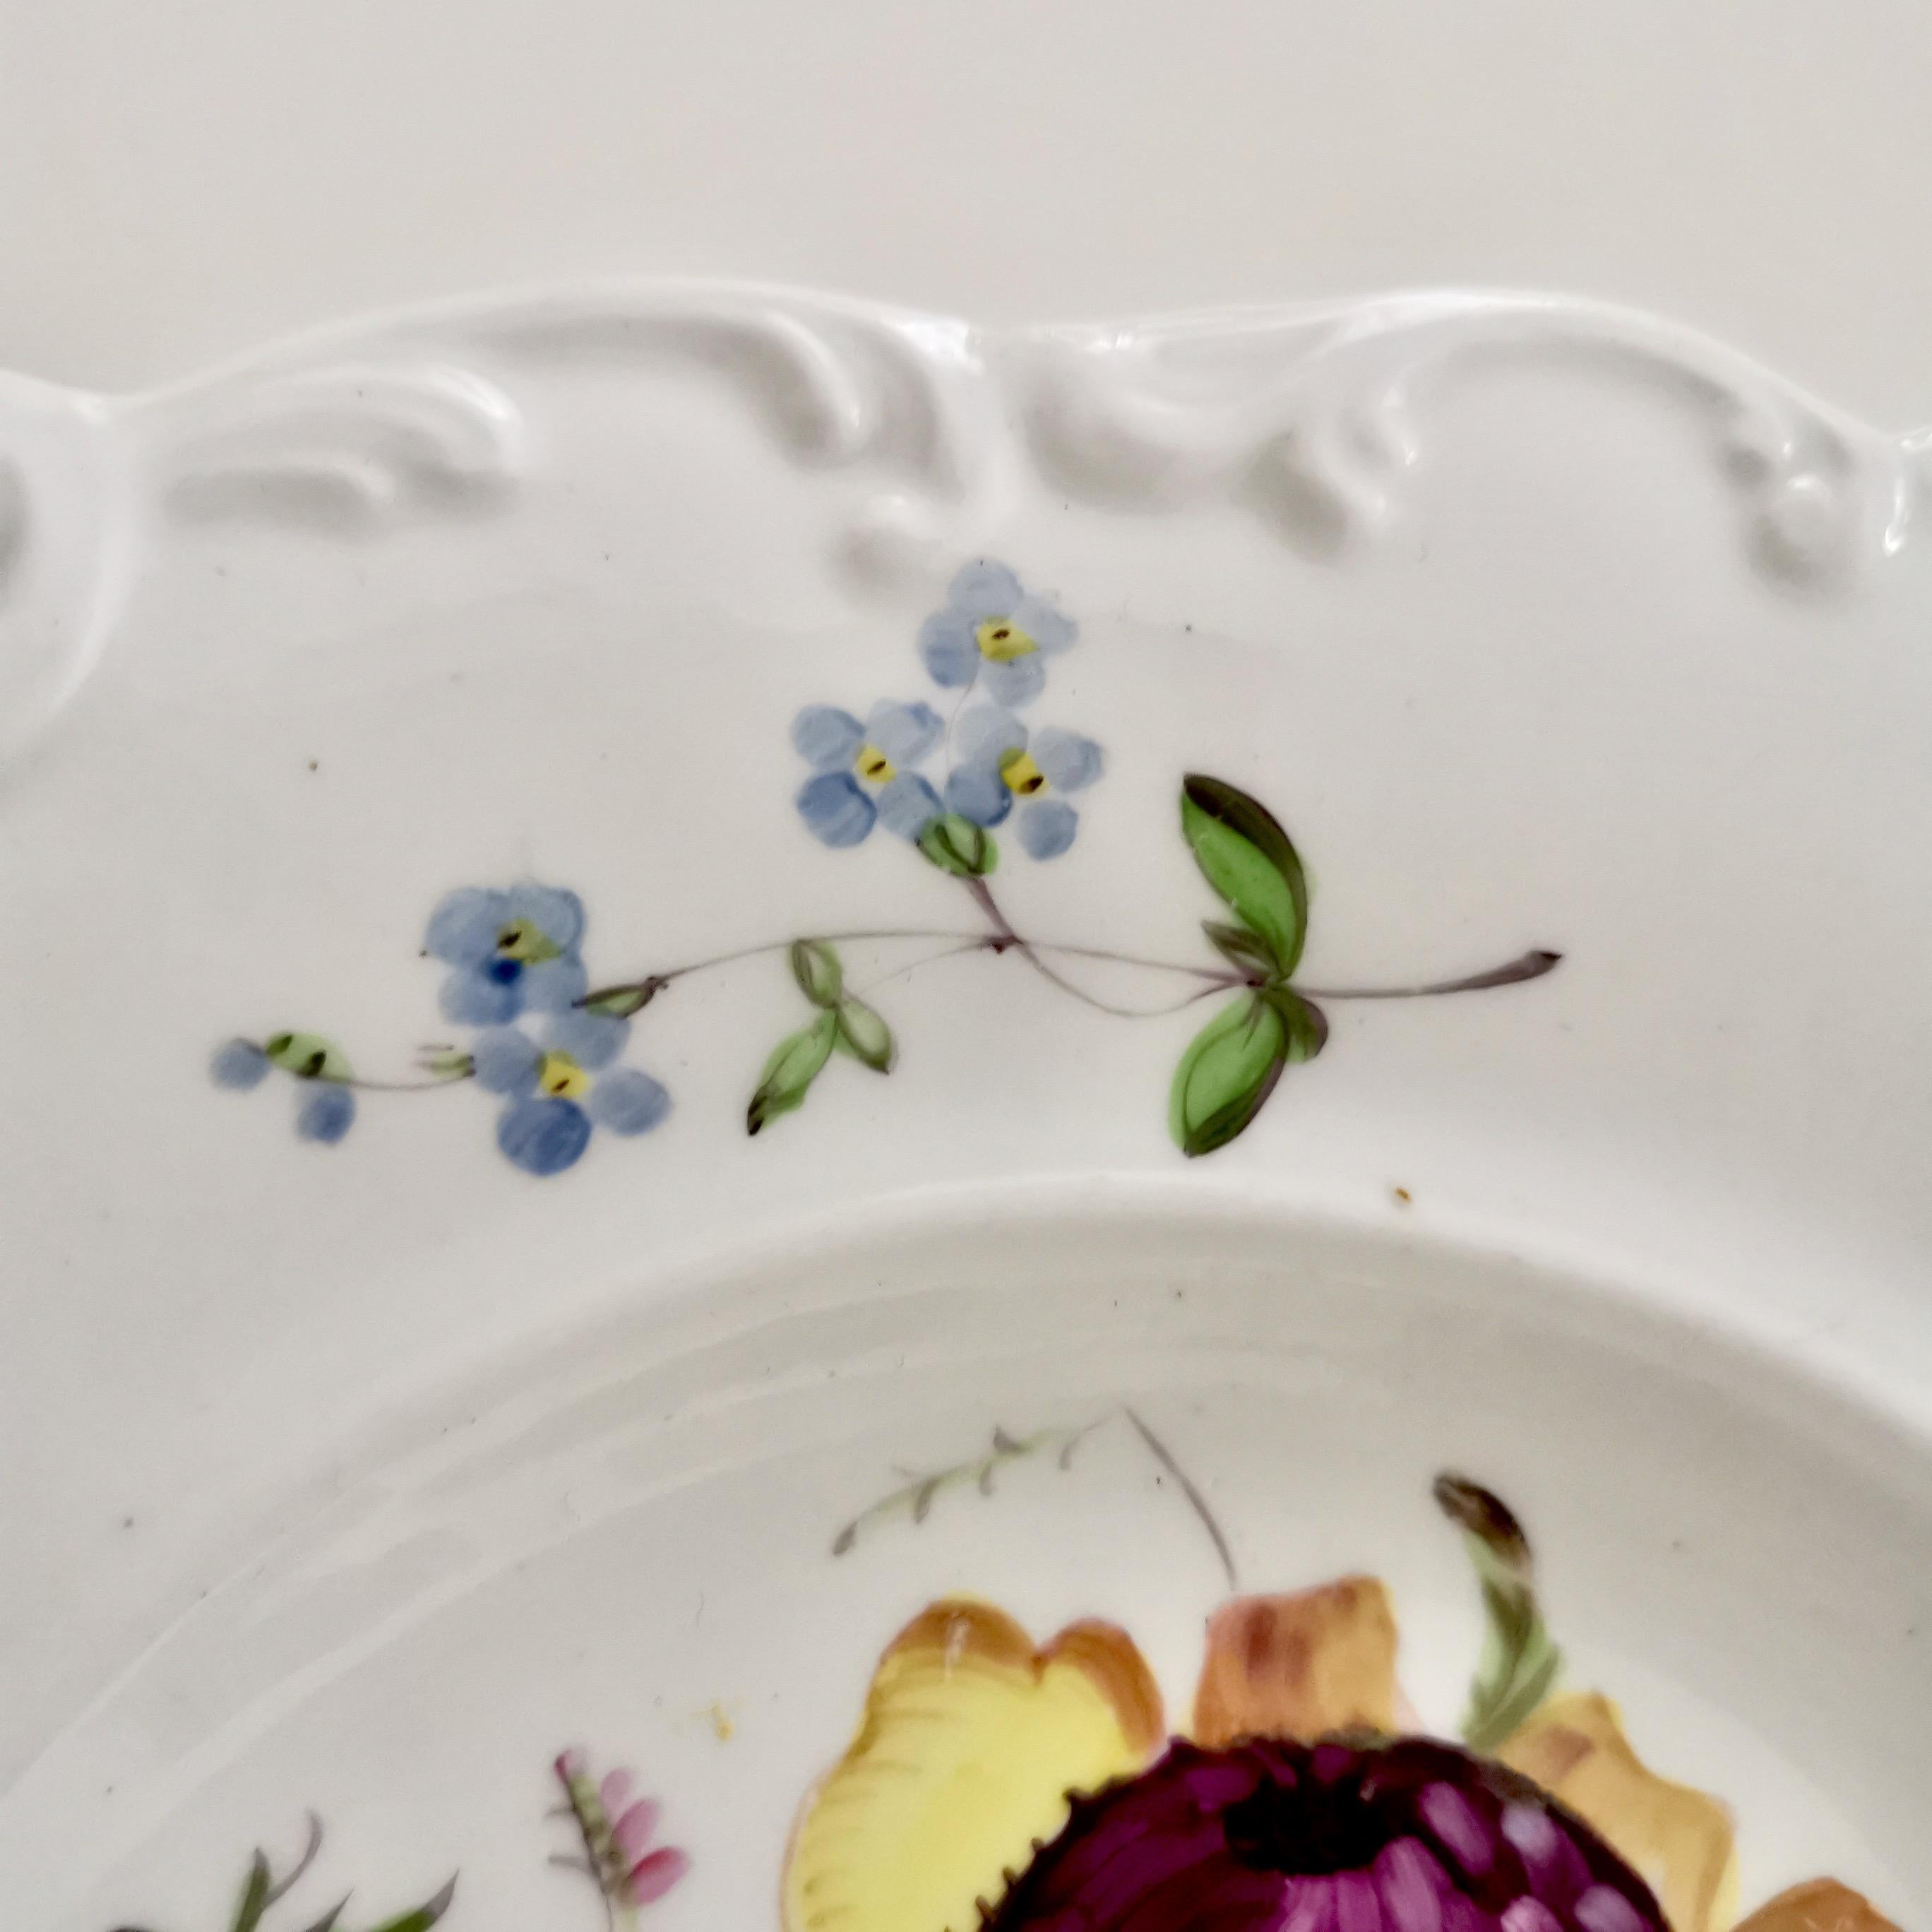 New Hall Porcelain Plate, White with Flowers, Inverted Shell, Regency circa 1820 1